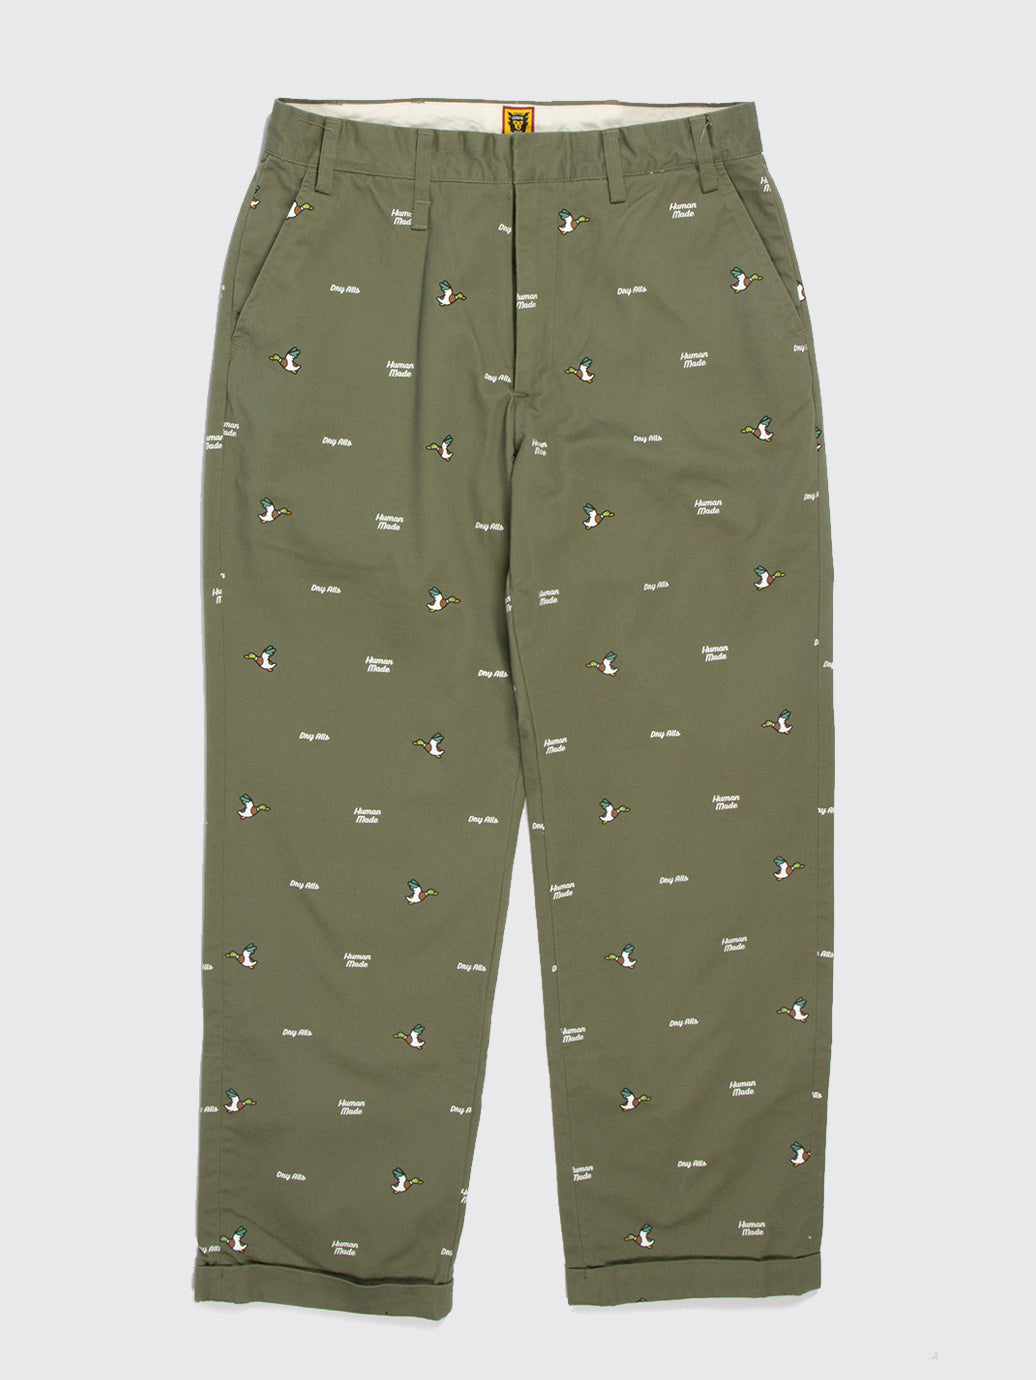 Human Made Pattern Printed Chino Pants Olive Drab – OALLERY